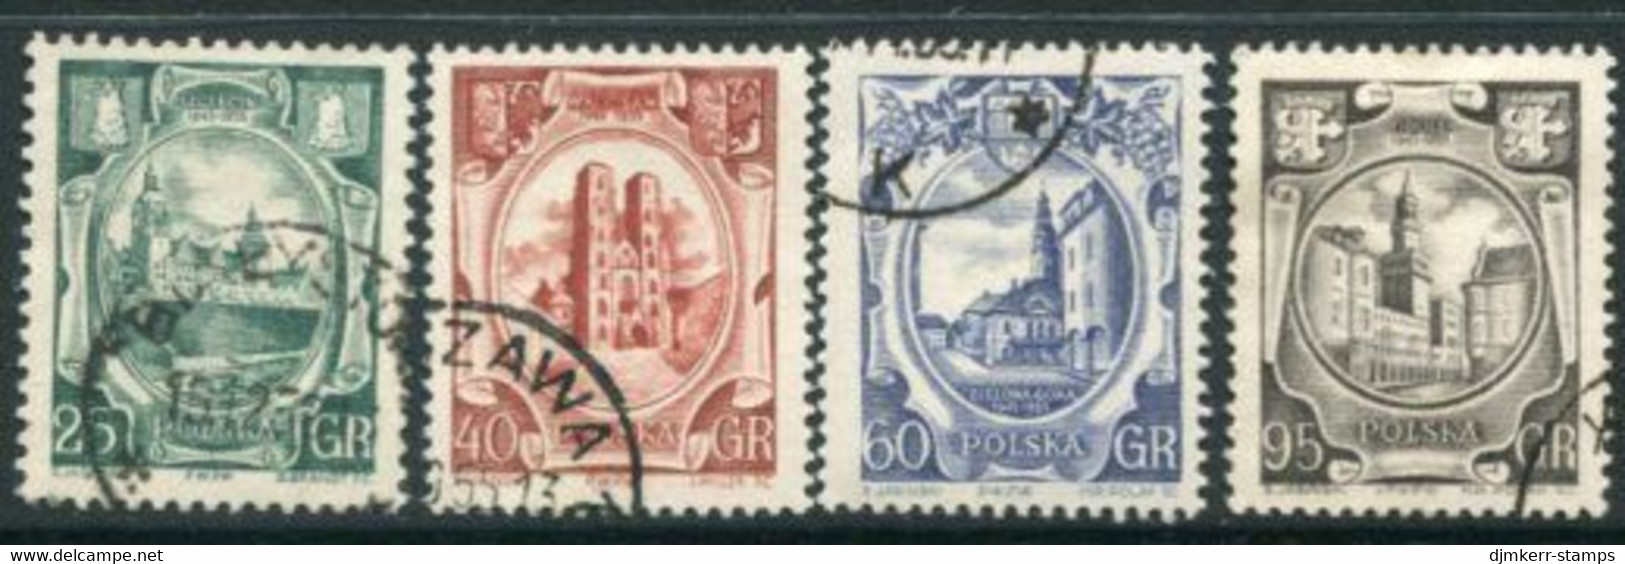 POLAND 1955 Incorporation Of Western Territories Used  Michel 942-45 - Gebraucht